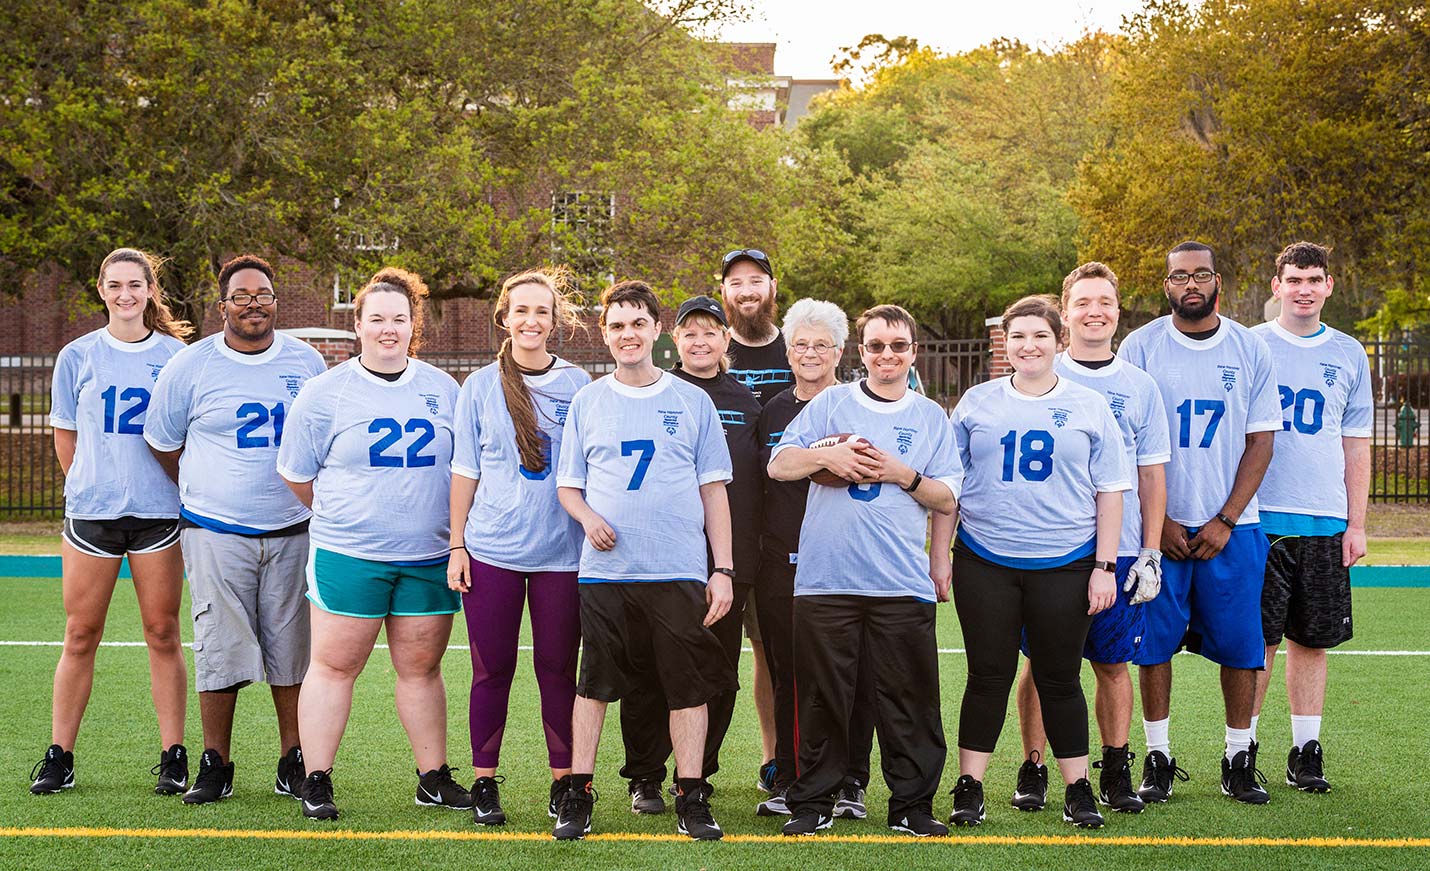 UNCW's Unified Flag Football Team poses for a group photo after practicing on the intramural fields.